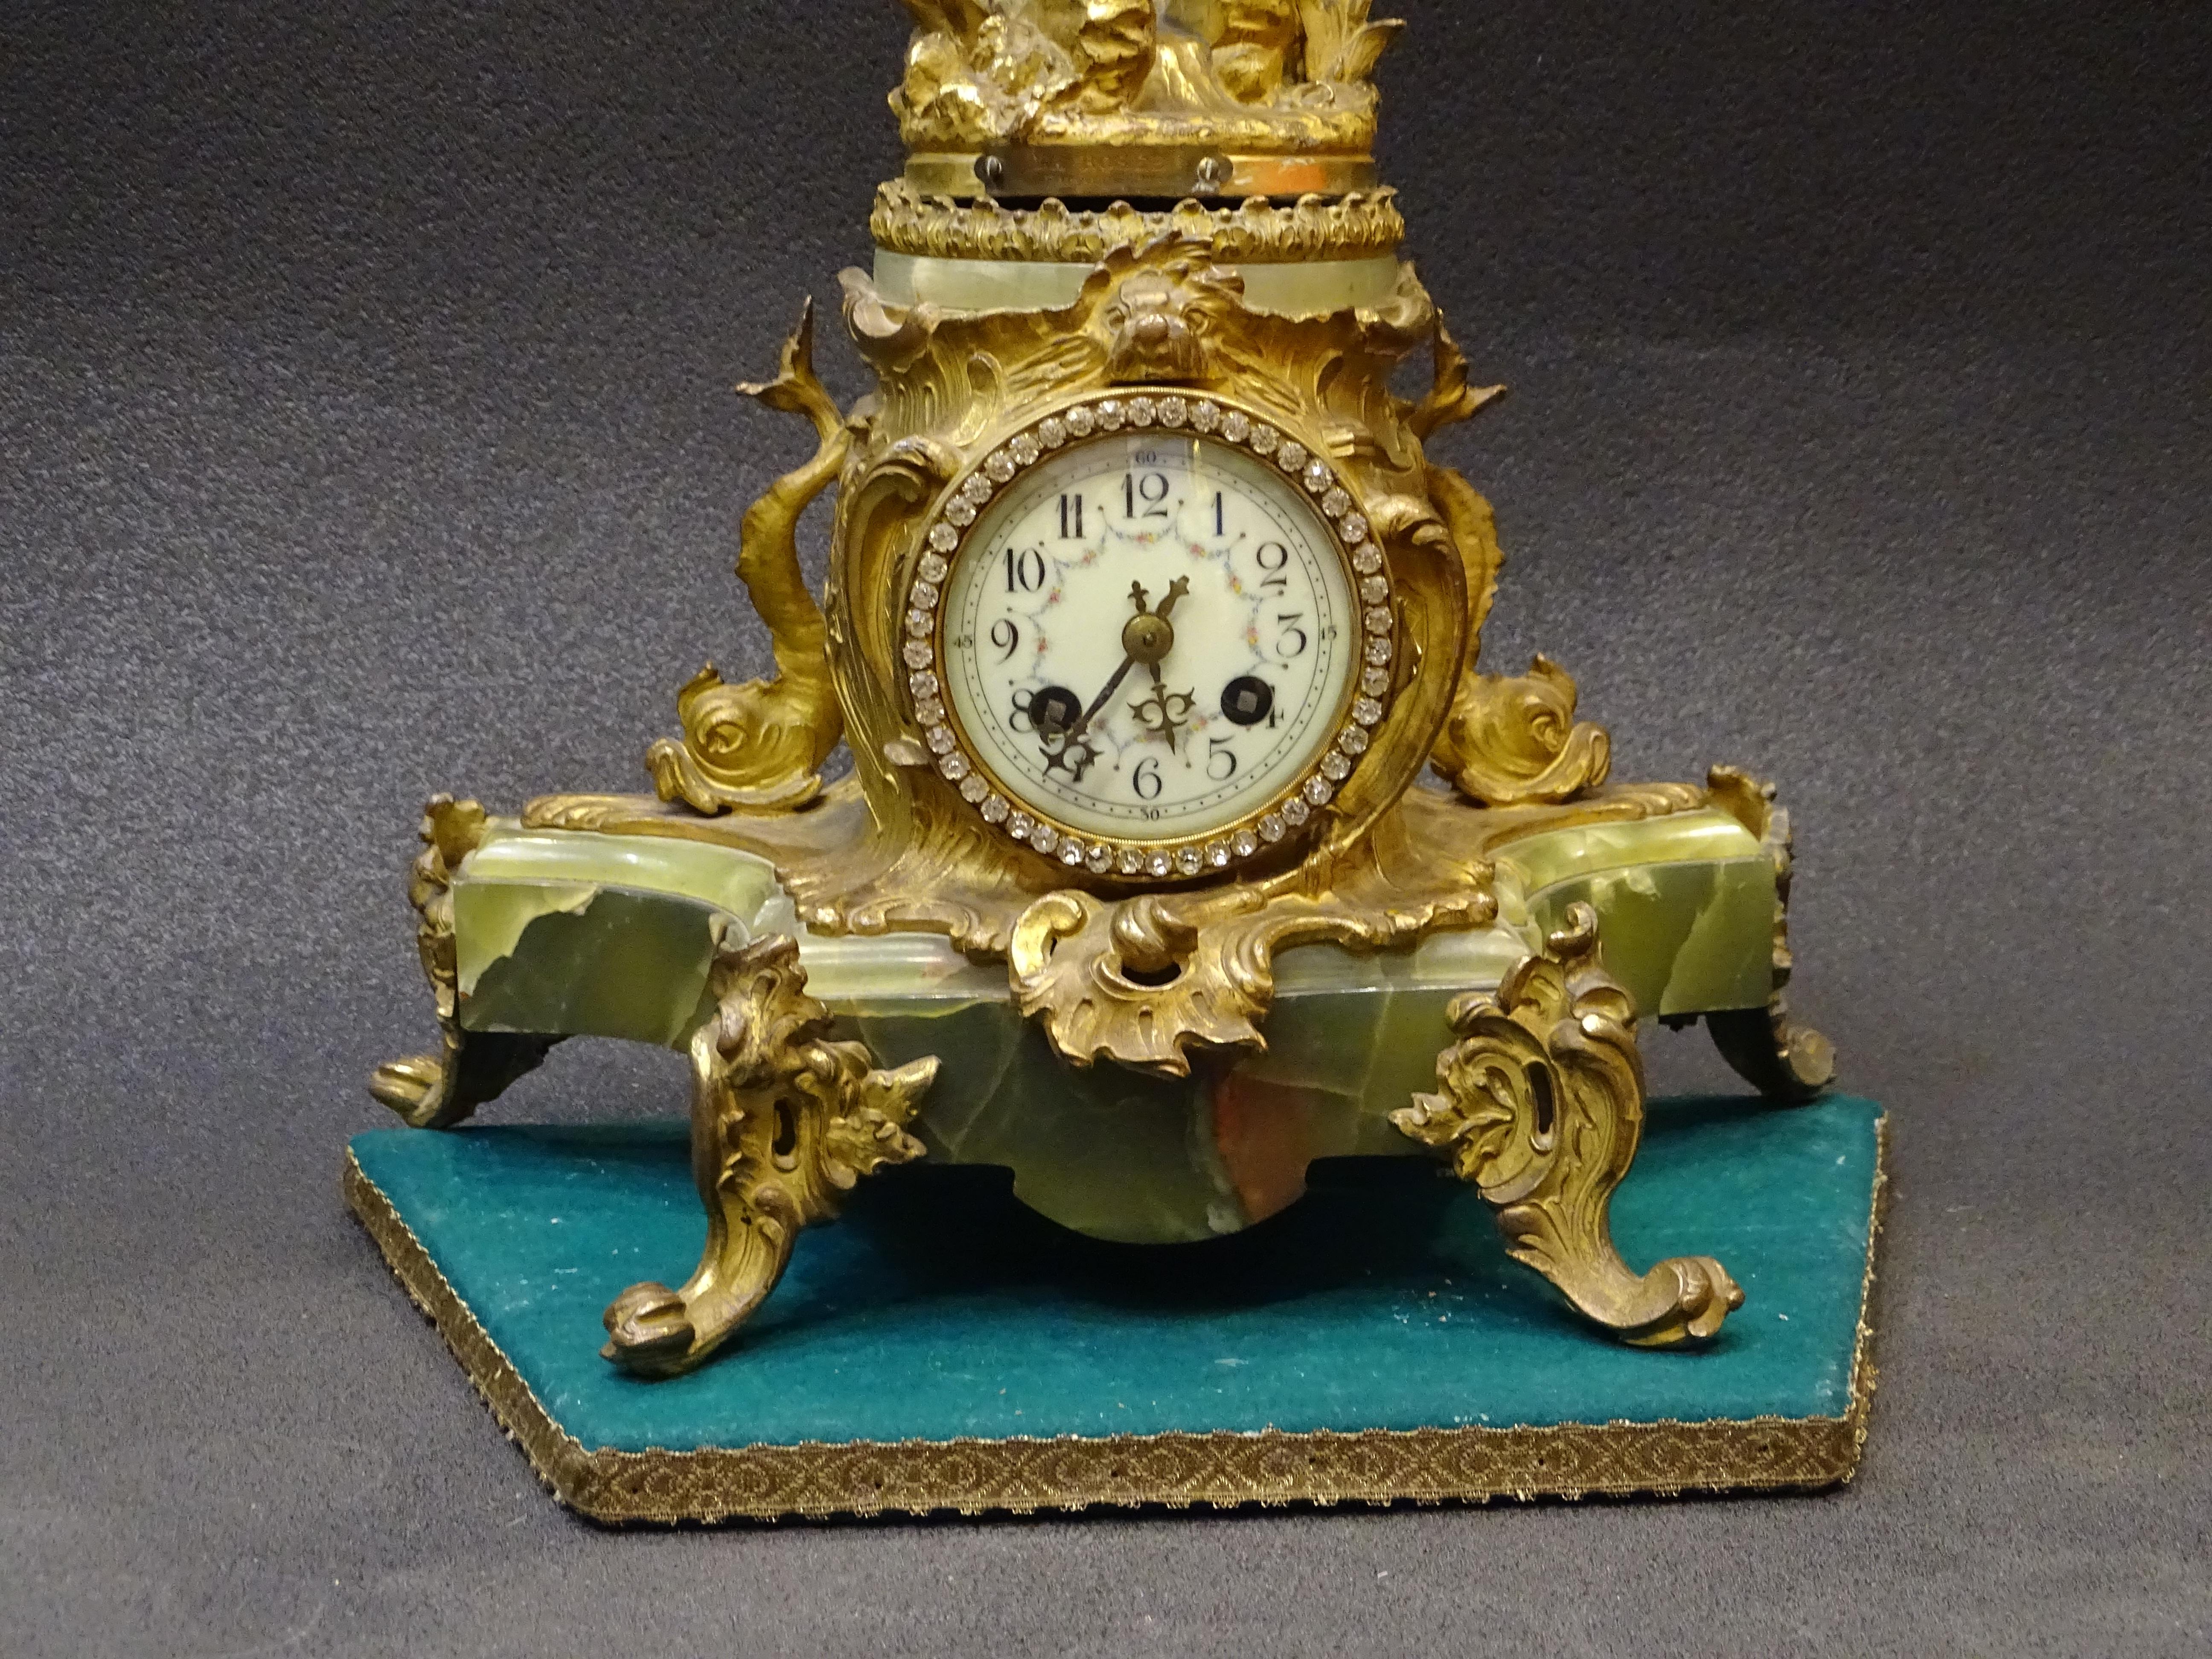 Hand-Crafted 19thcenturyfrench Mantelclock Sculpture Moureau, Bronce and Marble